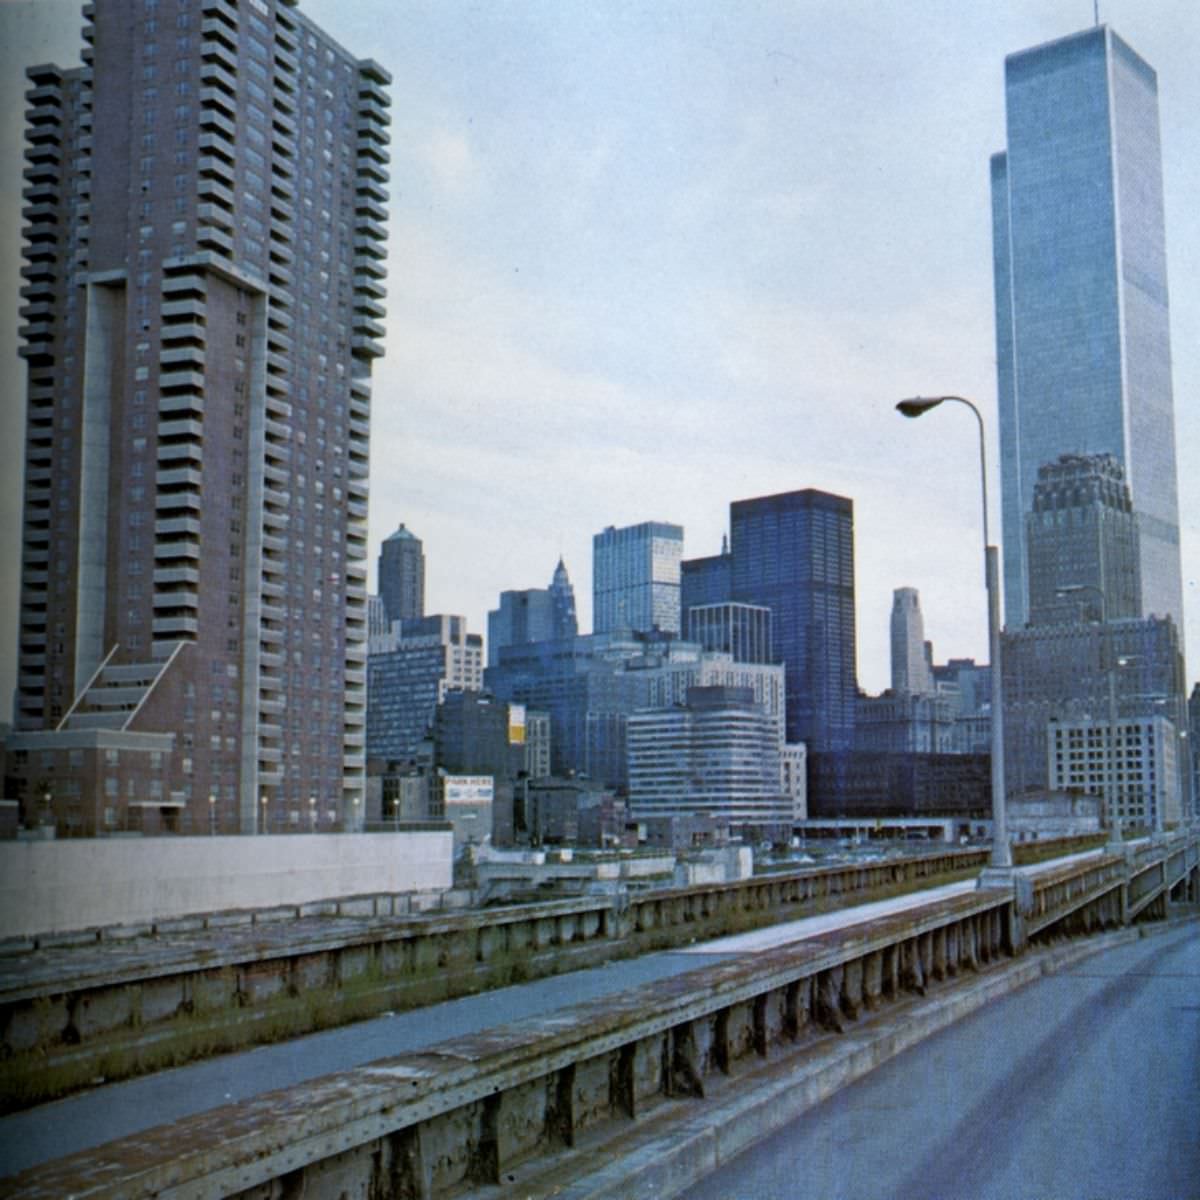 West Side Highway, photographed by Nicolai Canetti, 1976